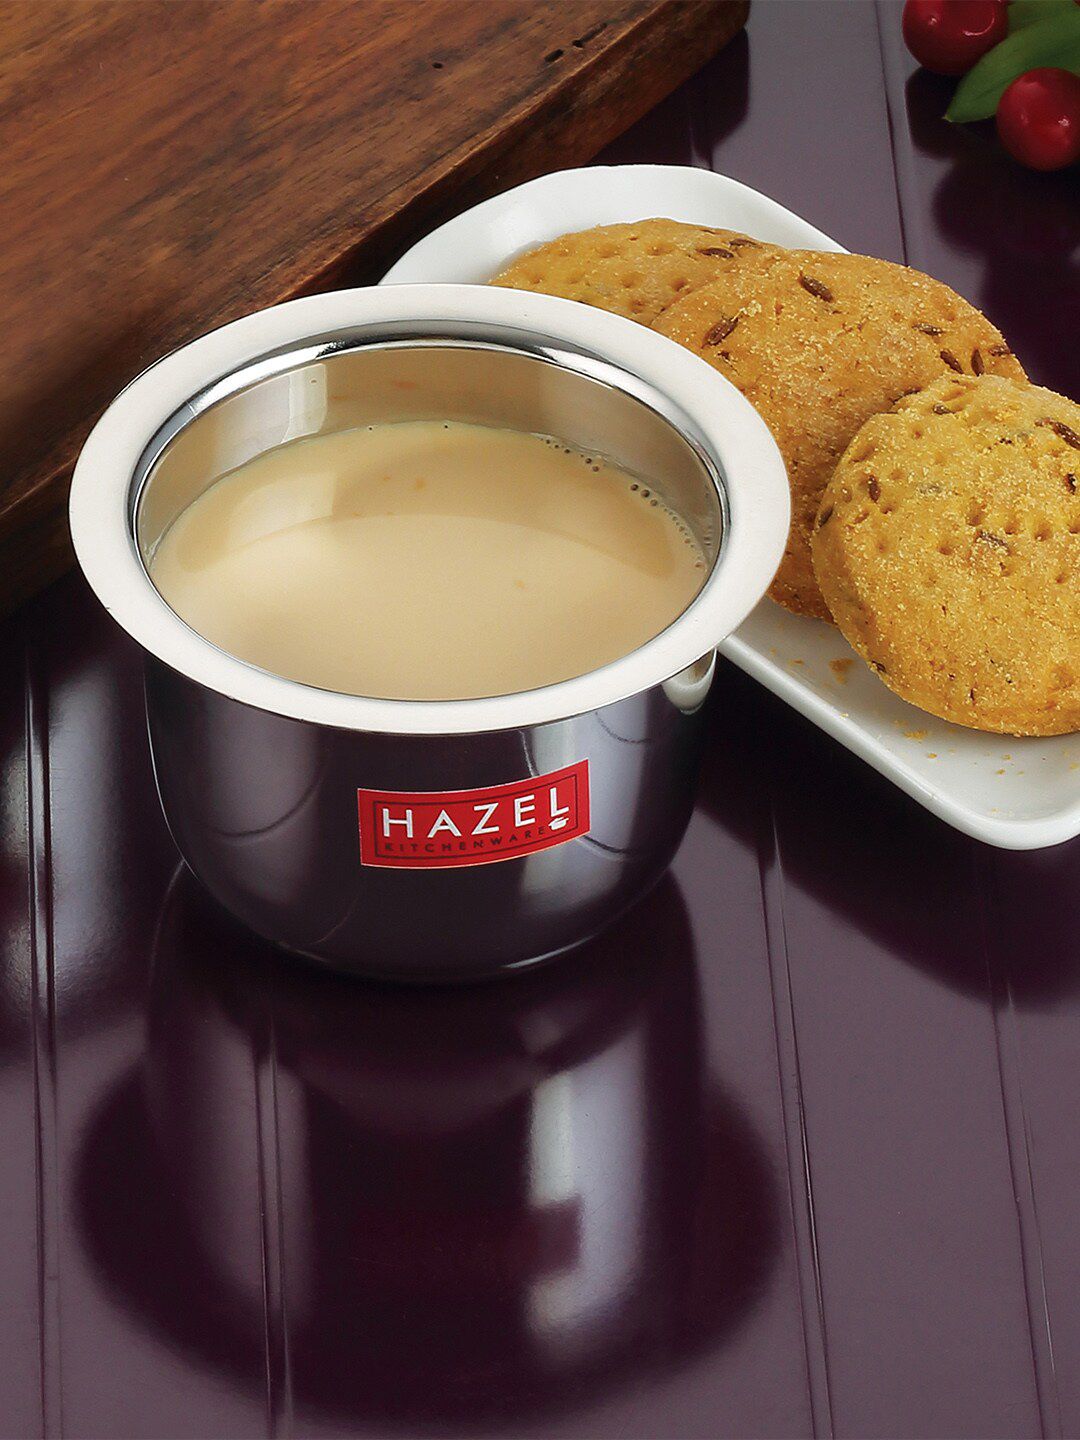 HAZEL Silver-Toned Solid Stainless Steel Glossy Cups Set of Cups and Mugs Price in India